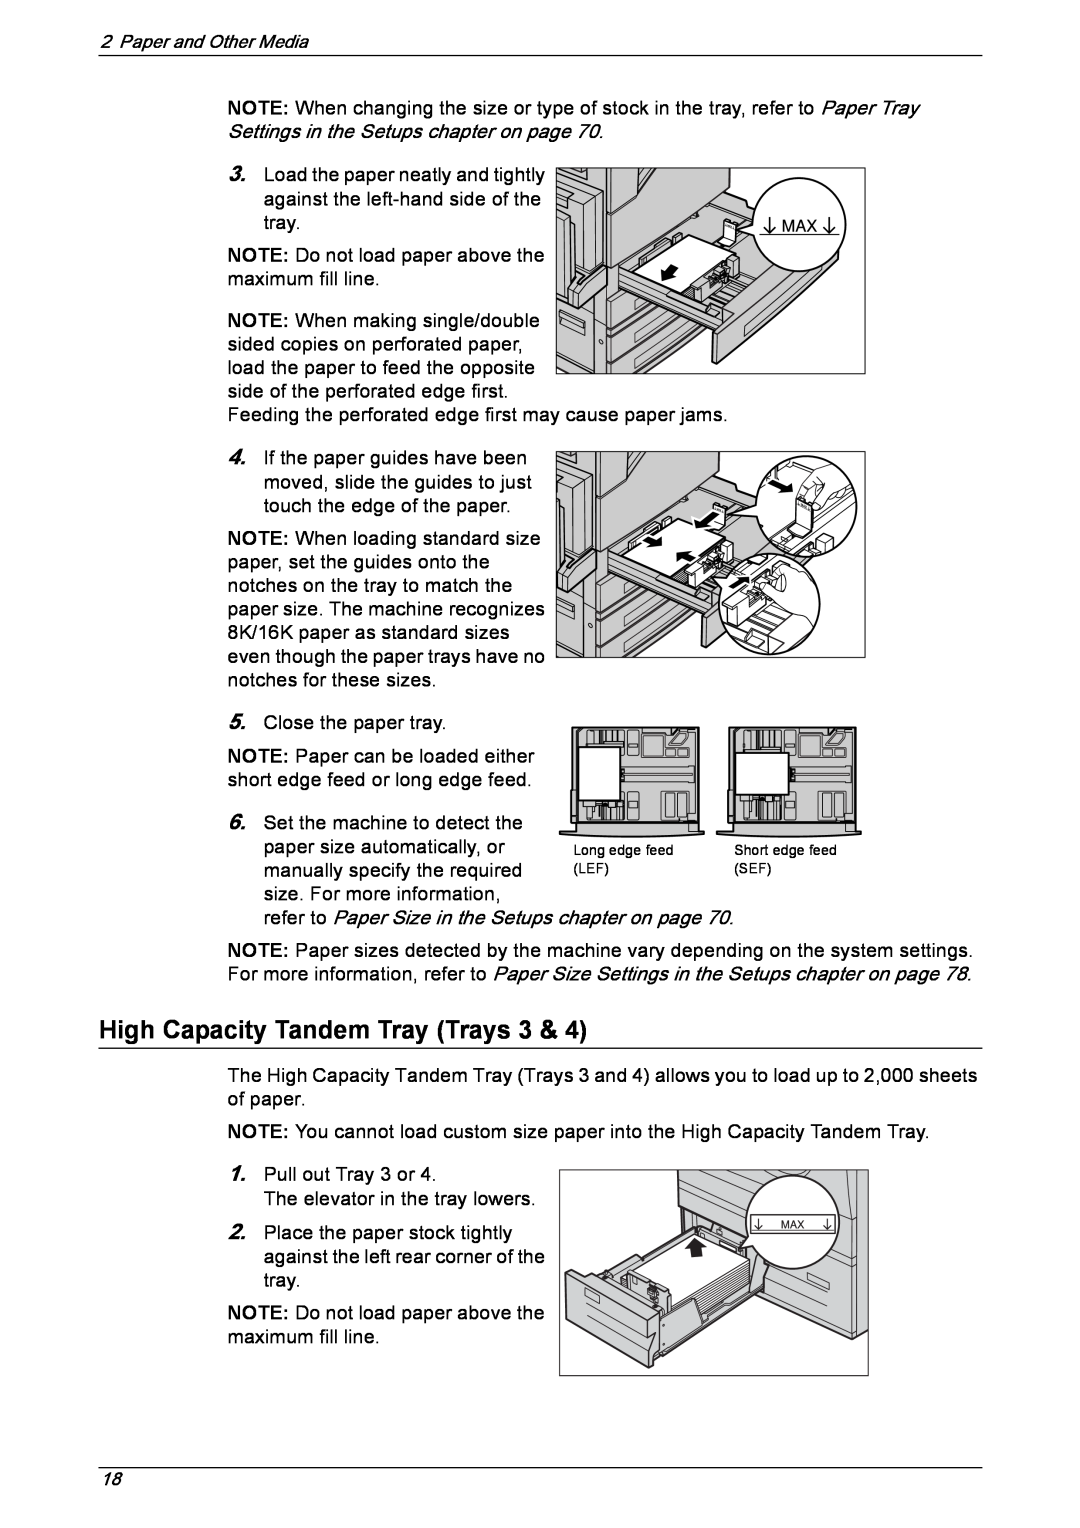 Xerox 5222 manual High Capacity Tandem Tray Trays 3, refer to Paper Size in the Setups chapter on page 